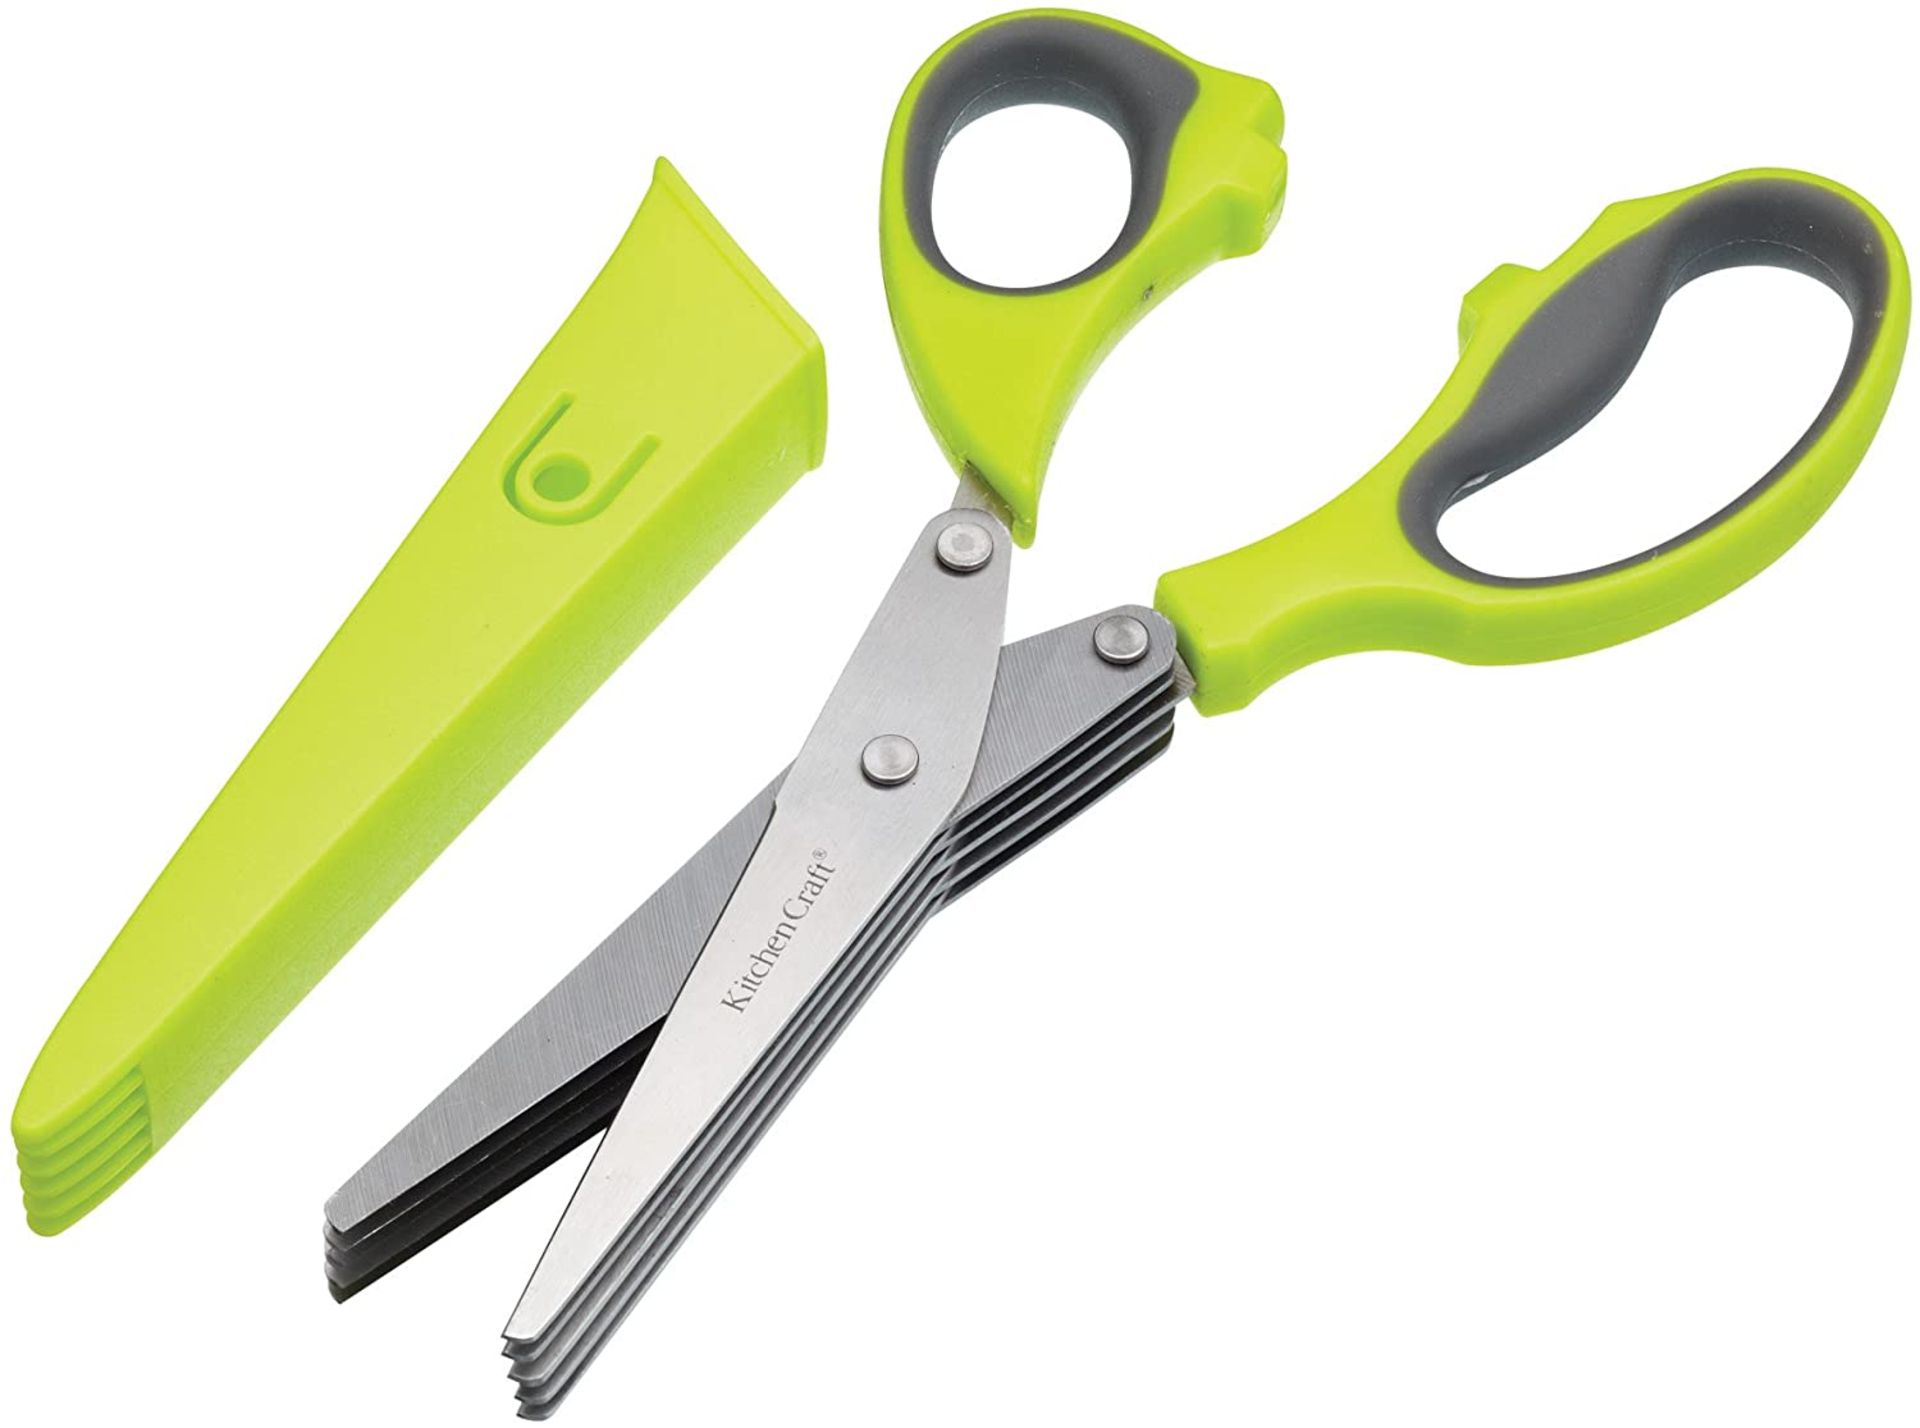 X2 BRAND NEW GARDEN CHEF HERB SCISSORS AND CASE - RRP £7.49 EACH